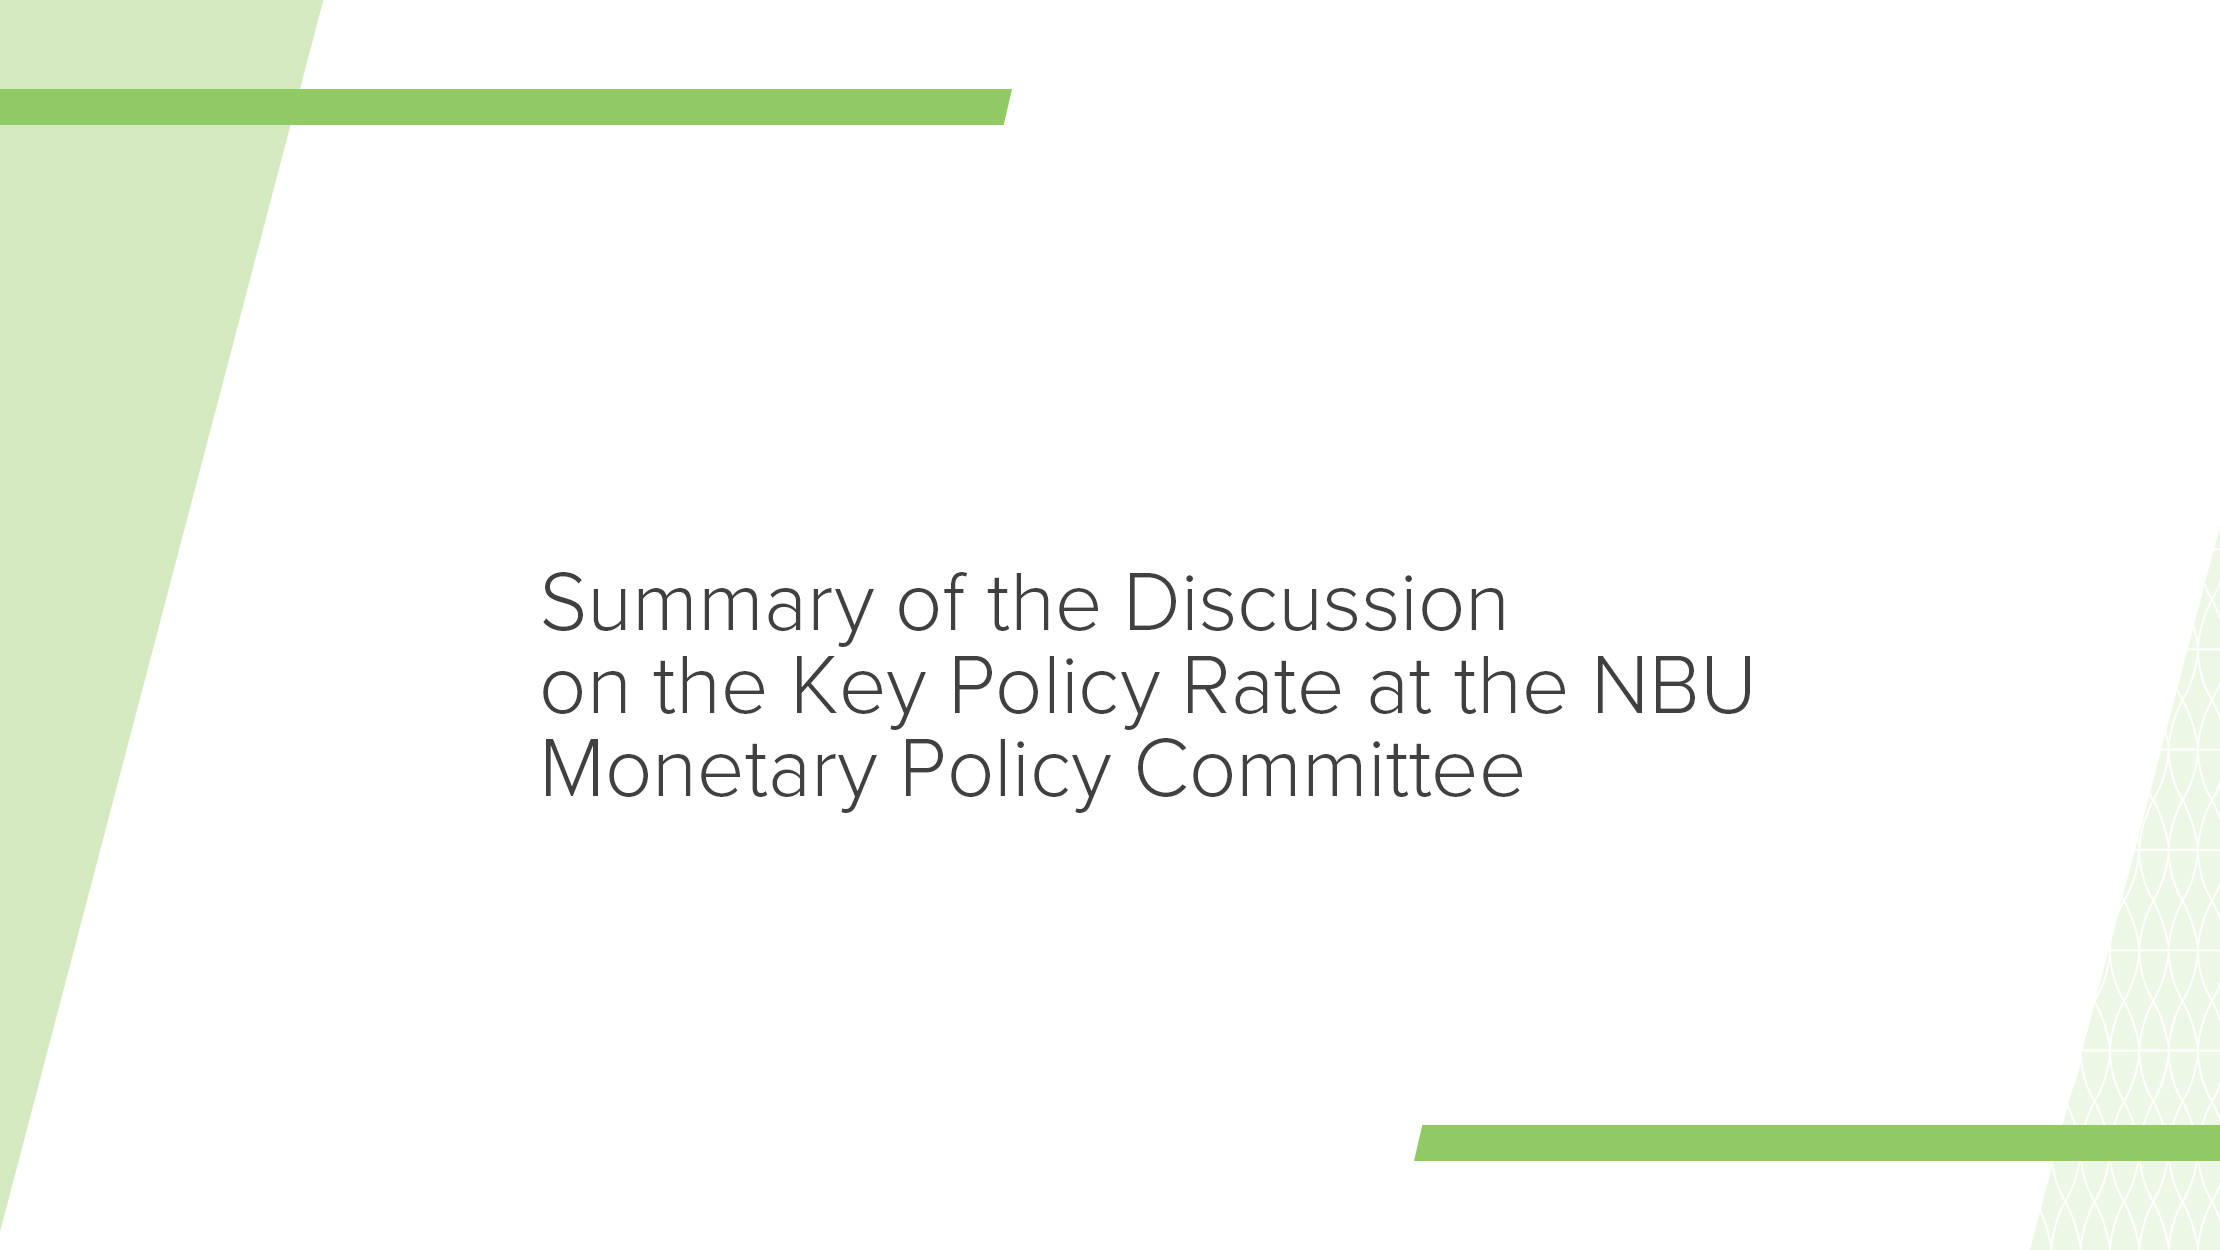 Summary of the Key Policy Rate Discussion by the NBU Monetary Policy Committee